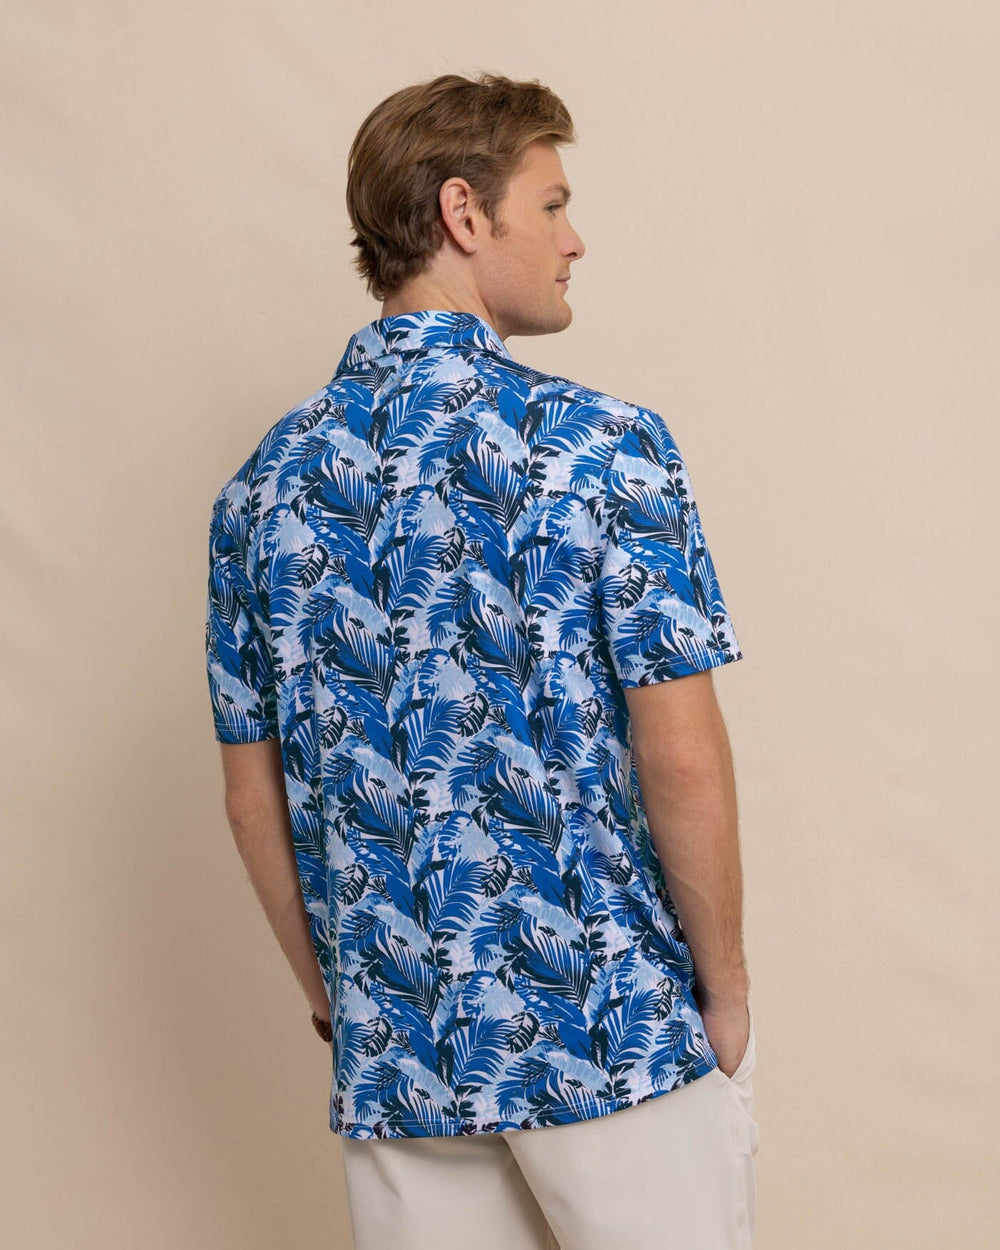 The back view of the Southern Tide Driver Paradise Palms Polo Shirt by Southern Tide - Classic White